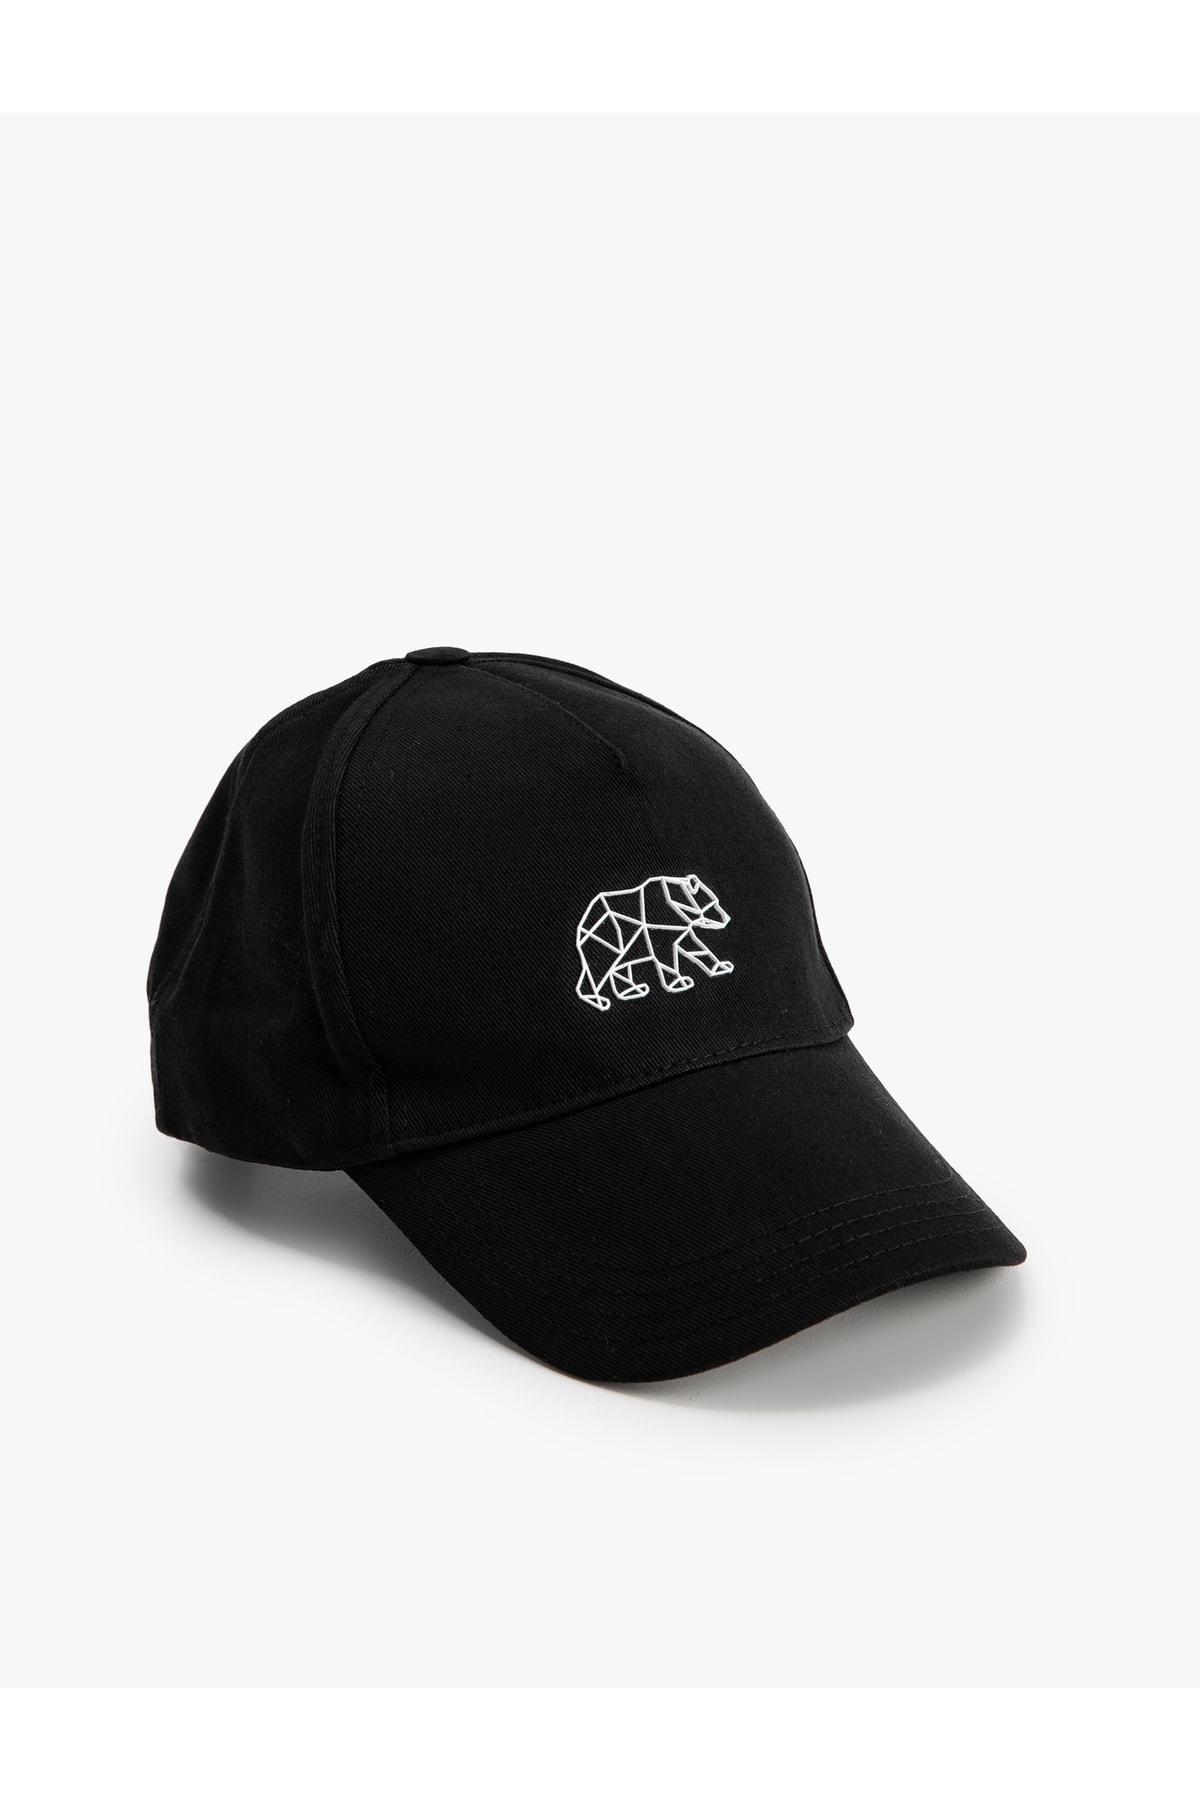 Koton Cap Hat Dog Embroidered